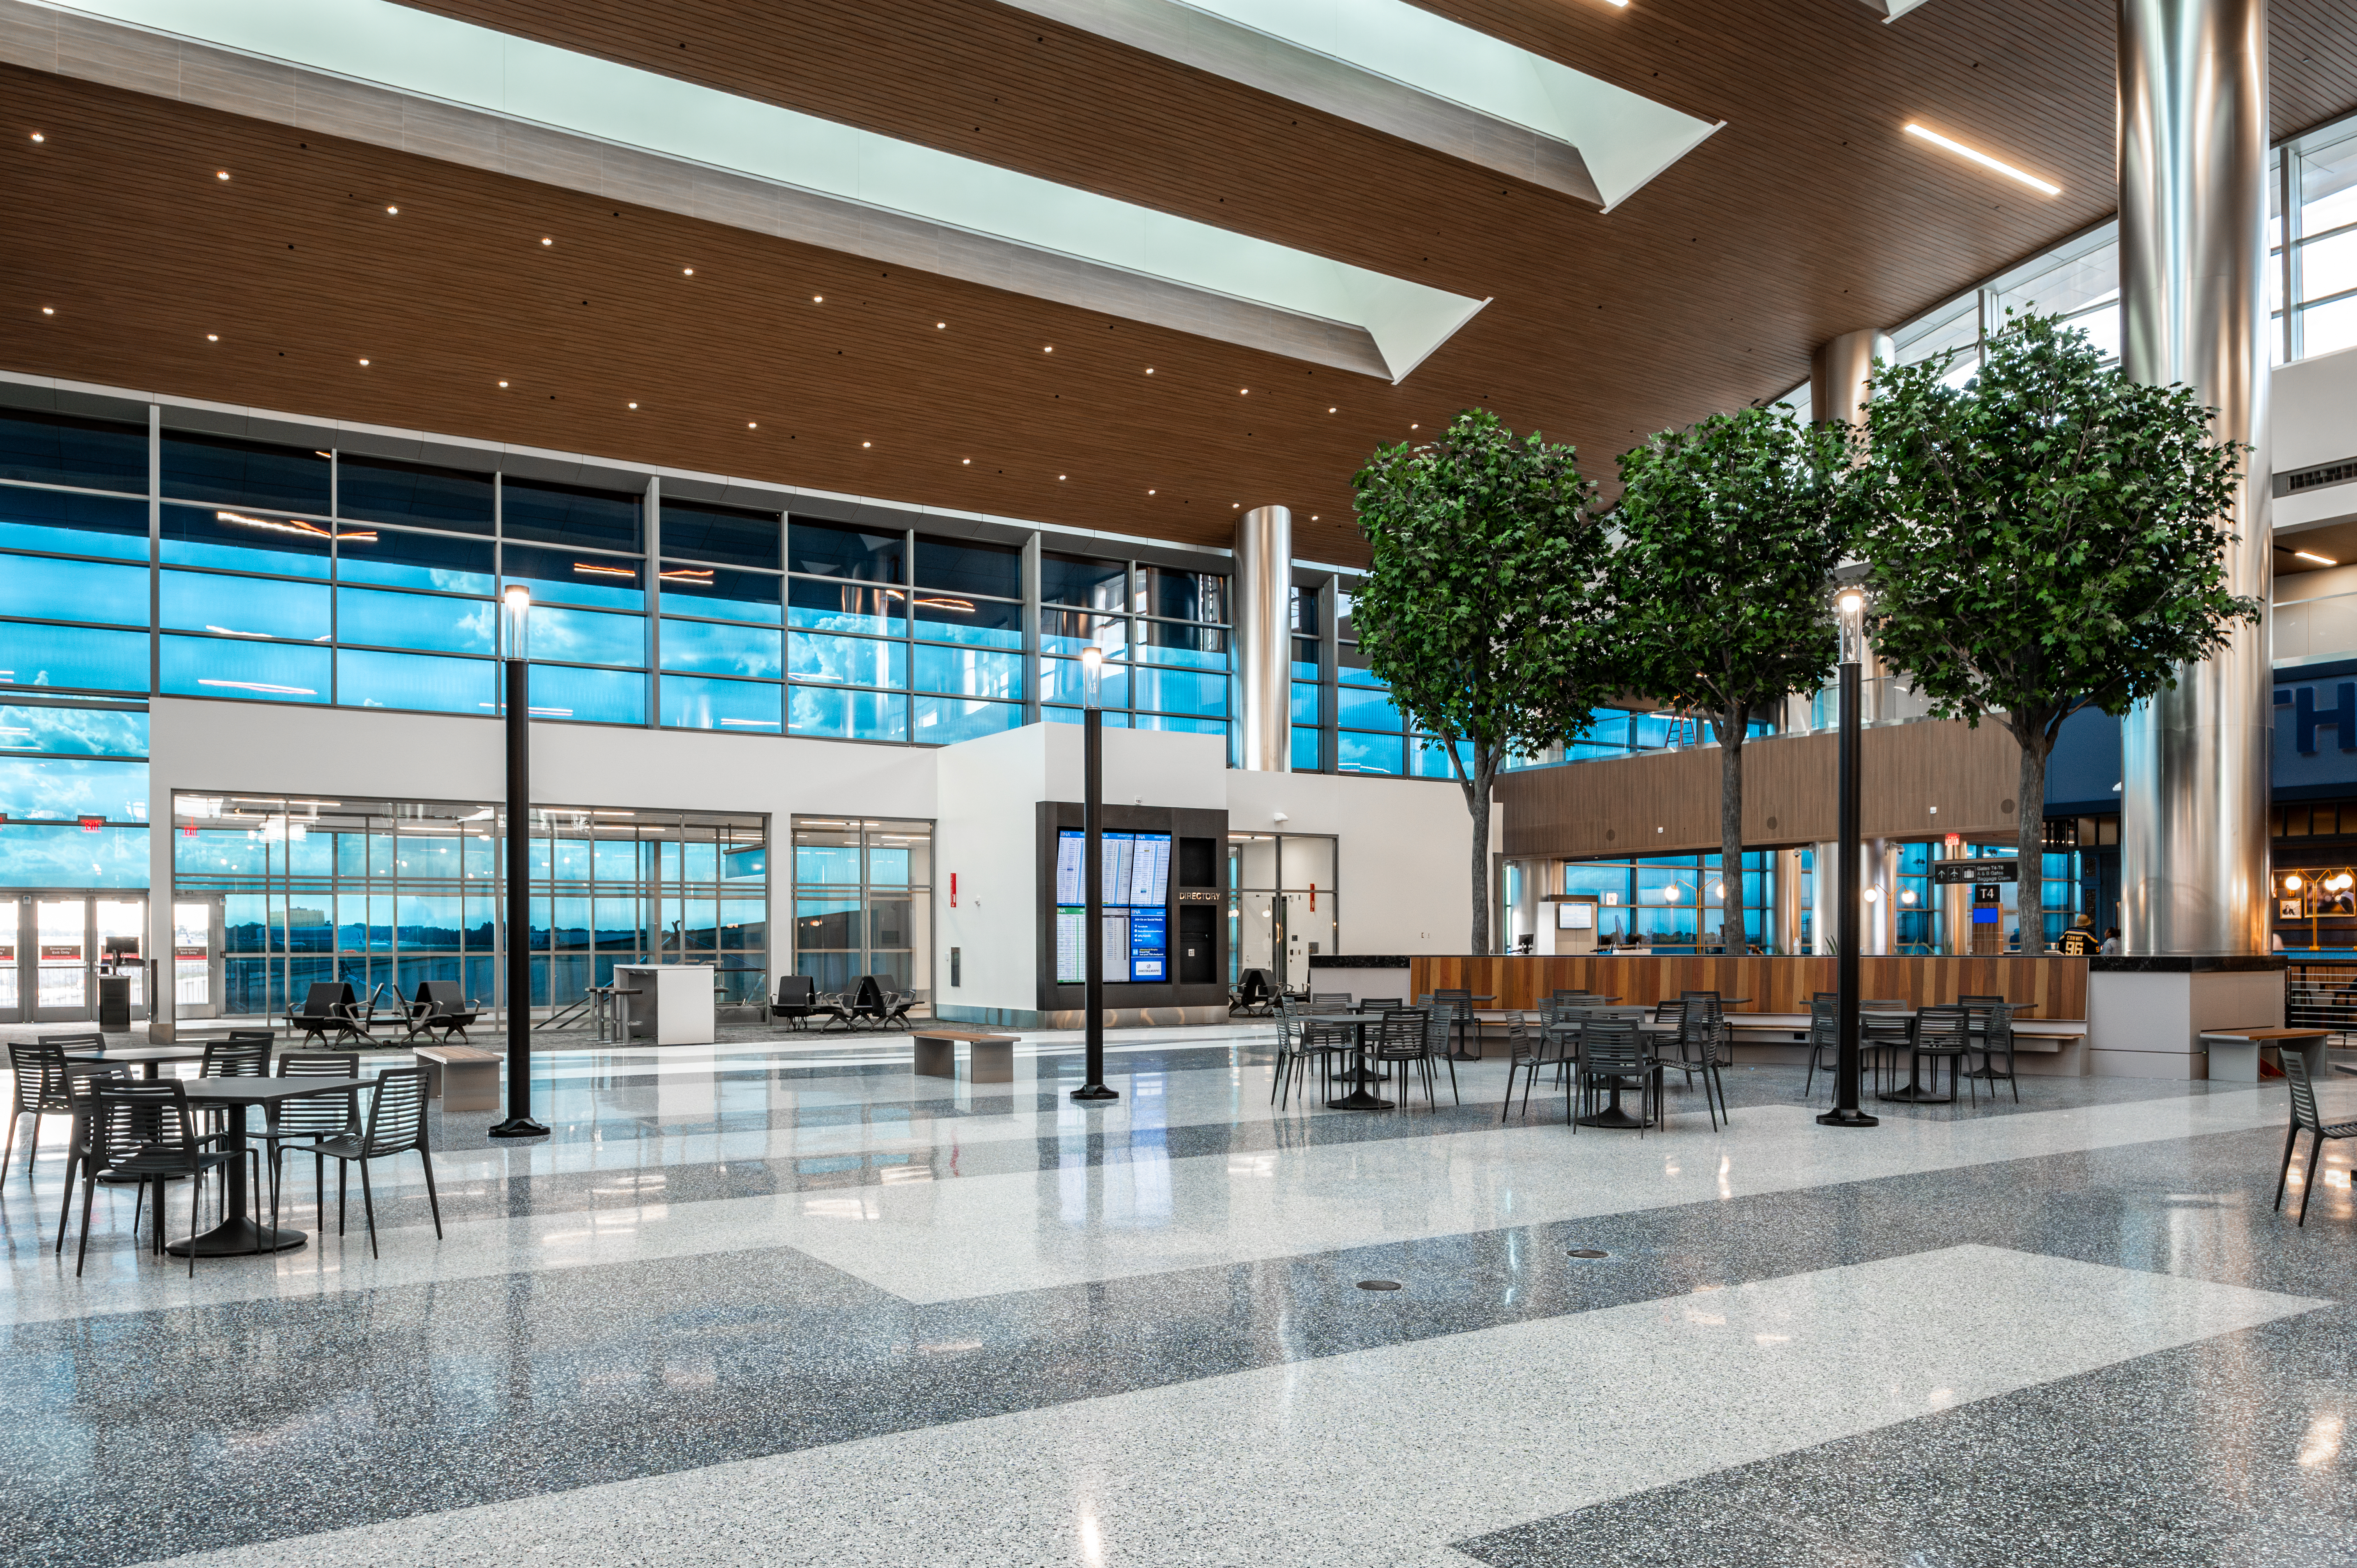 Image of the open atrium at the BNA Marketplace in Nashville International Airport